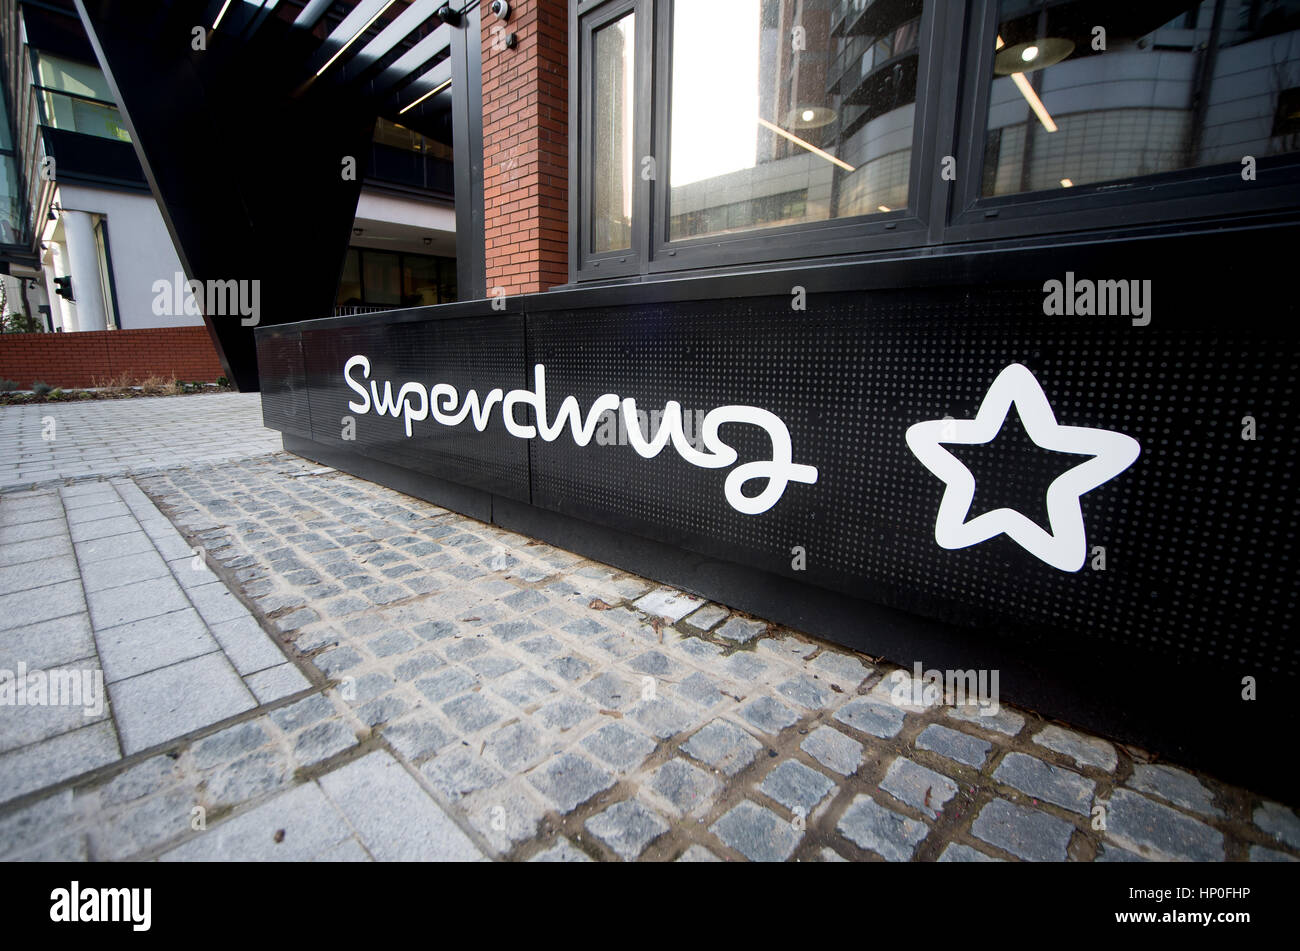 Pictures of health and beauty retailer Superdrug's Head offices in Croydon, London, UK on its launch day. Stock Photo